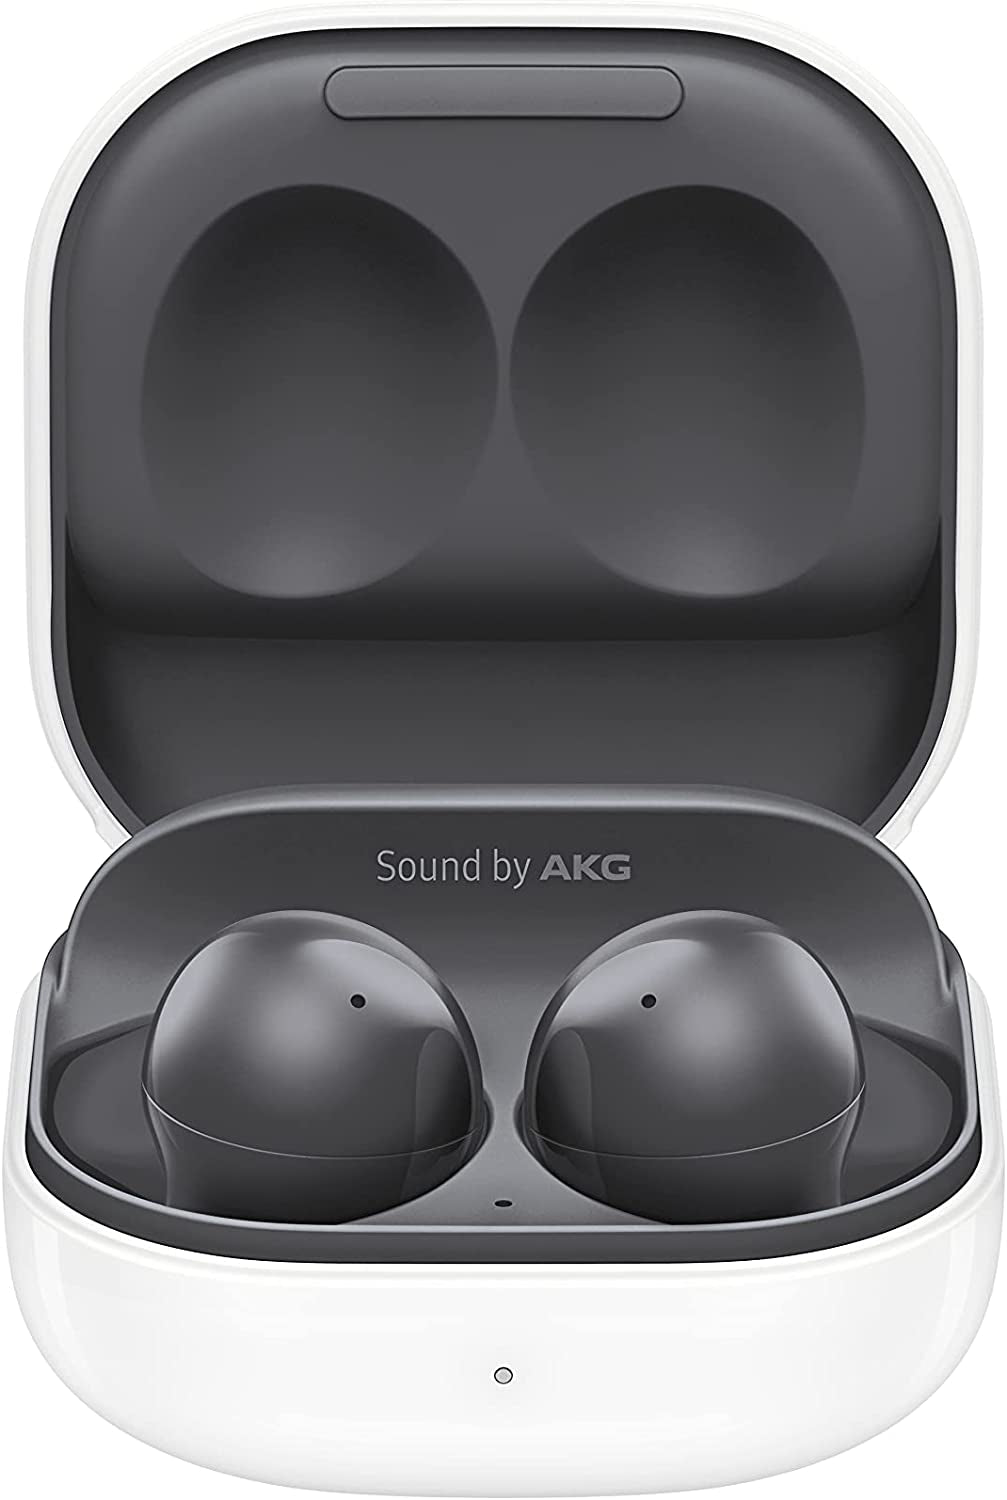 Samsumg Galaxy Buds 2 True Wireless Bluetooth Earbuds, Noise Cancelling, Ambient Sound, Lightweight Comfort Fit in Ear, Auto Switch Audio, Long Battery Life, Touch Control US Version, Graphite